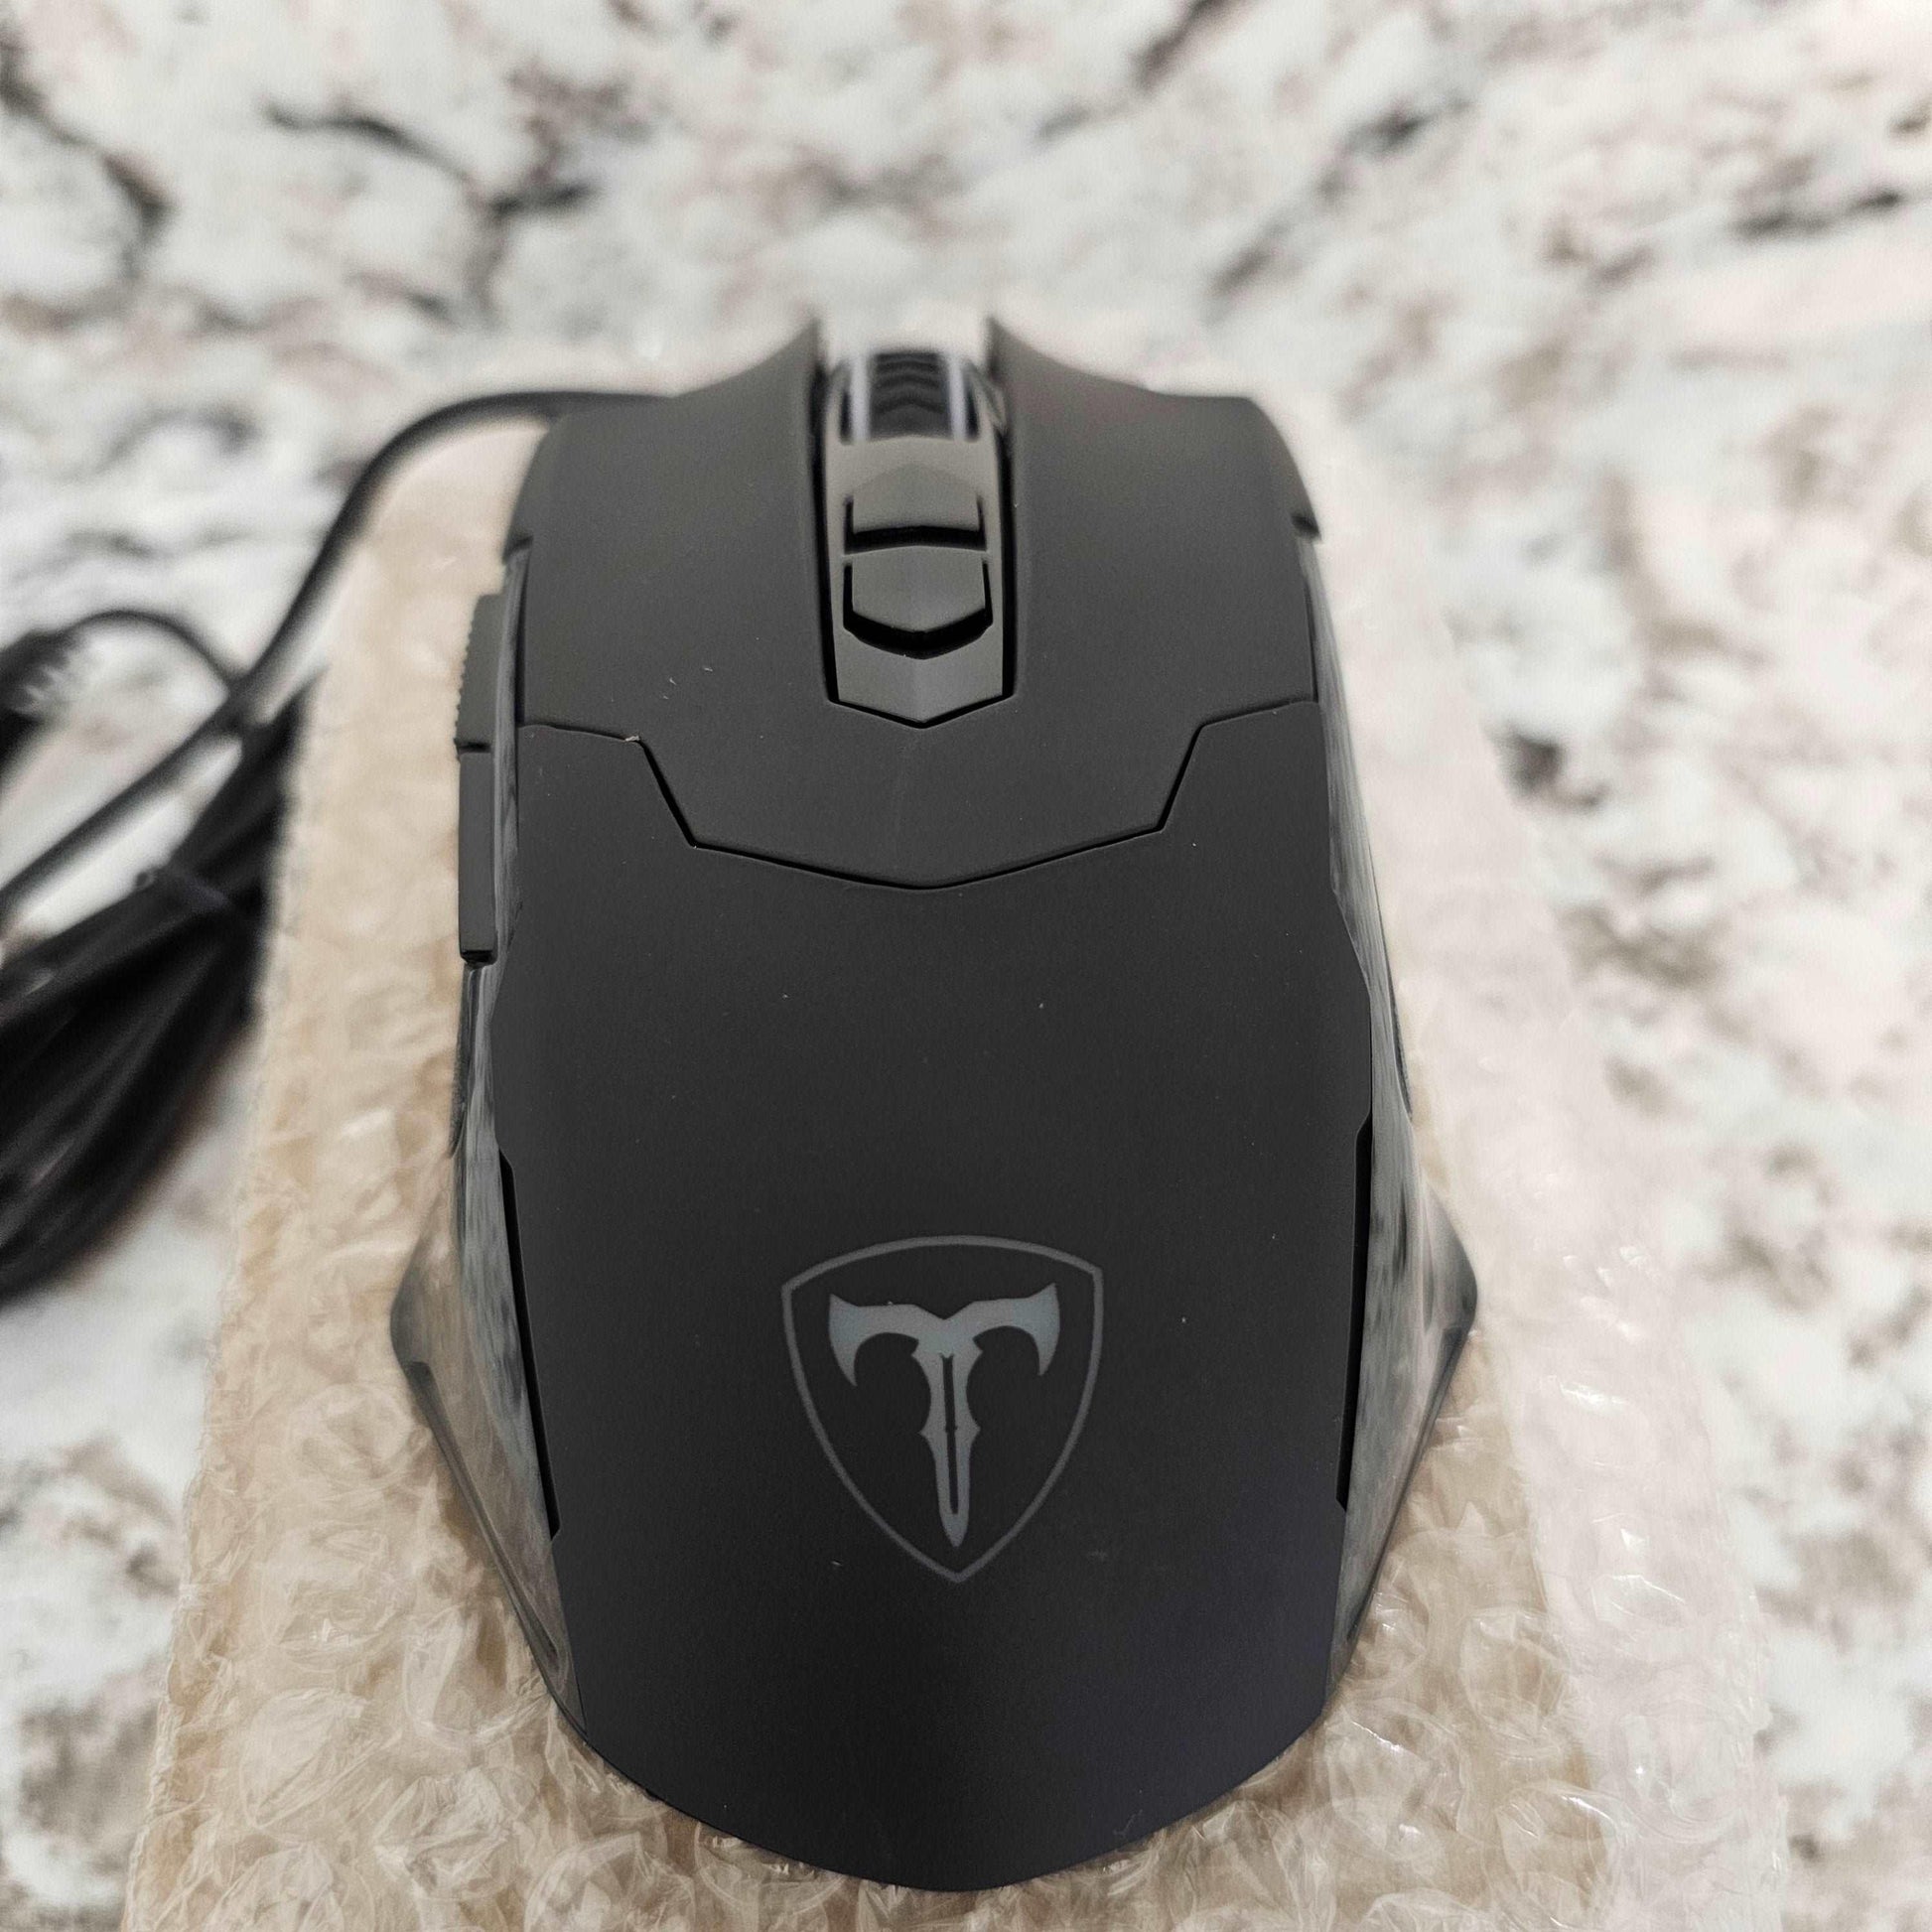 Wired Mouse Black Pictek T7 - DQ Distribution